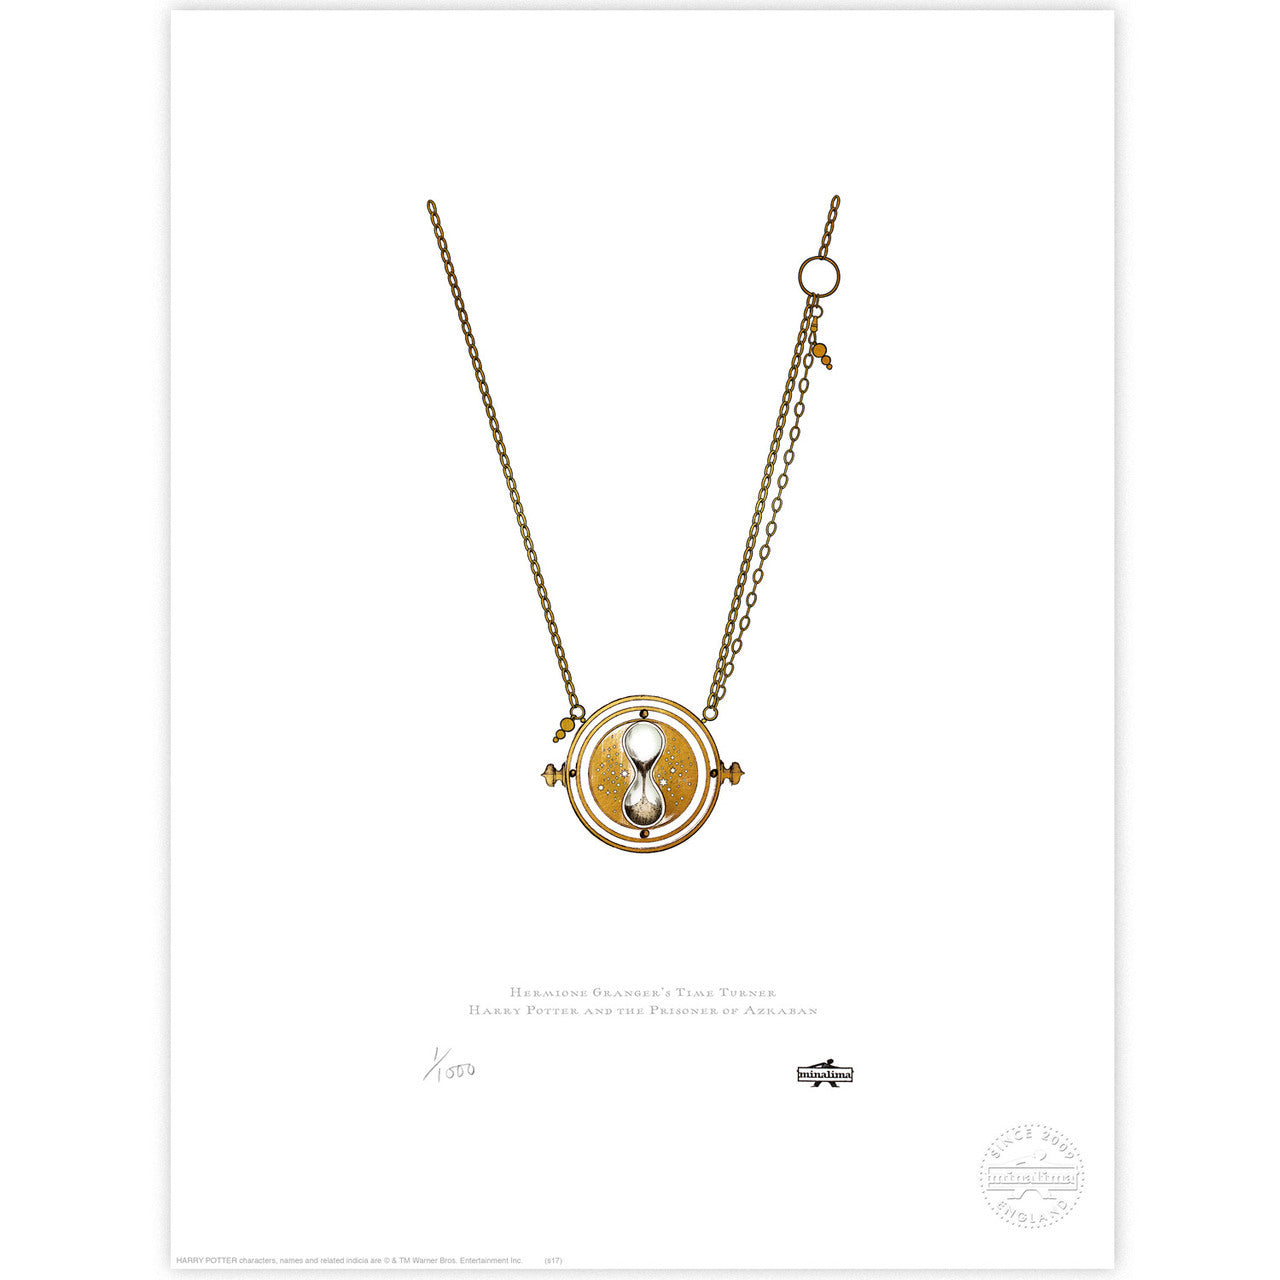 Hermione Granger's Time-Turner Limited Edition Art Print